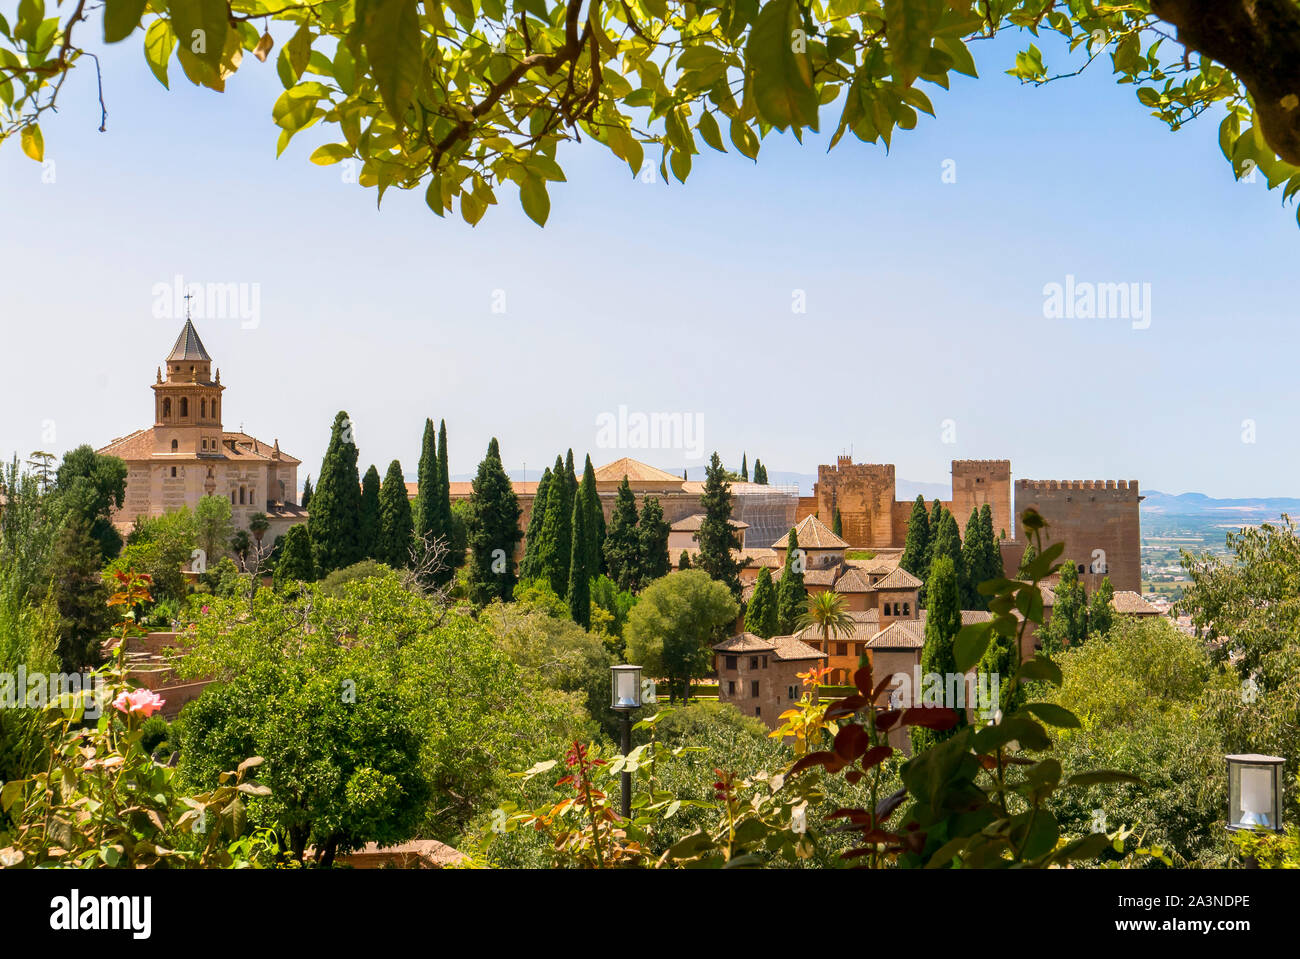 Palace of the Alhambra in Granada Stock Photo